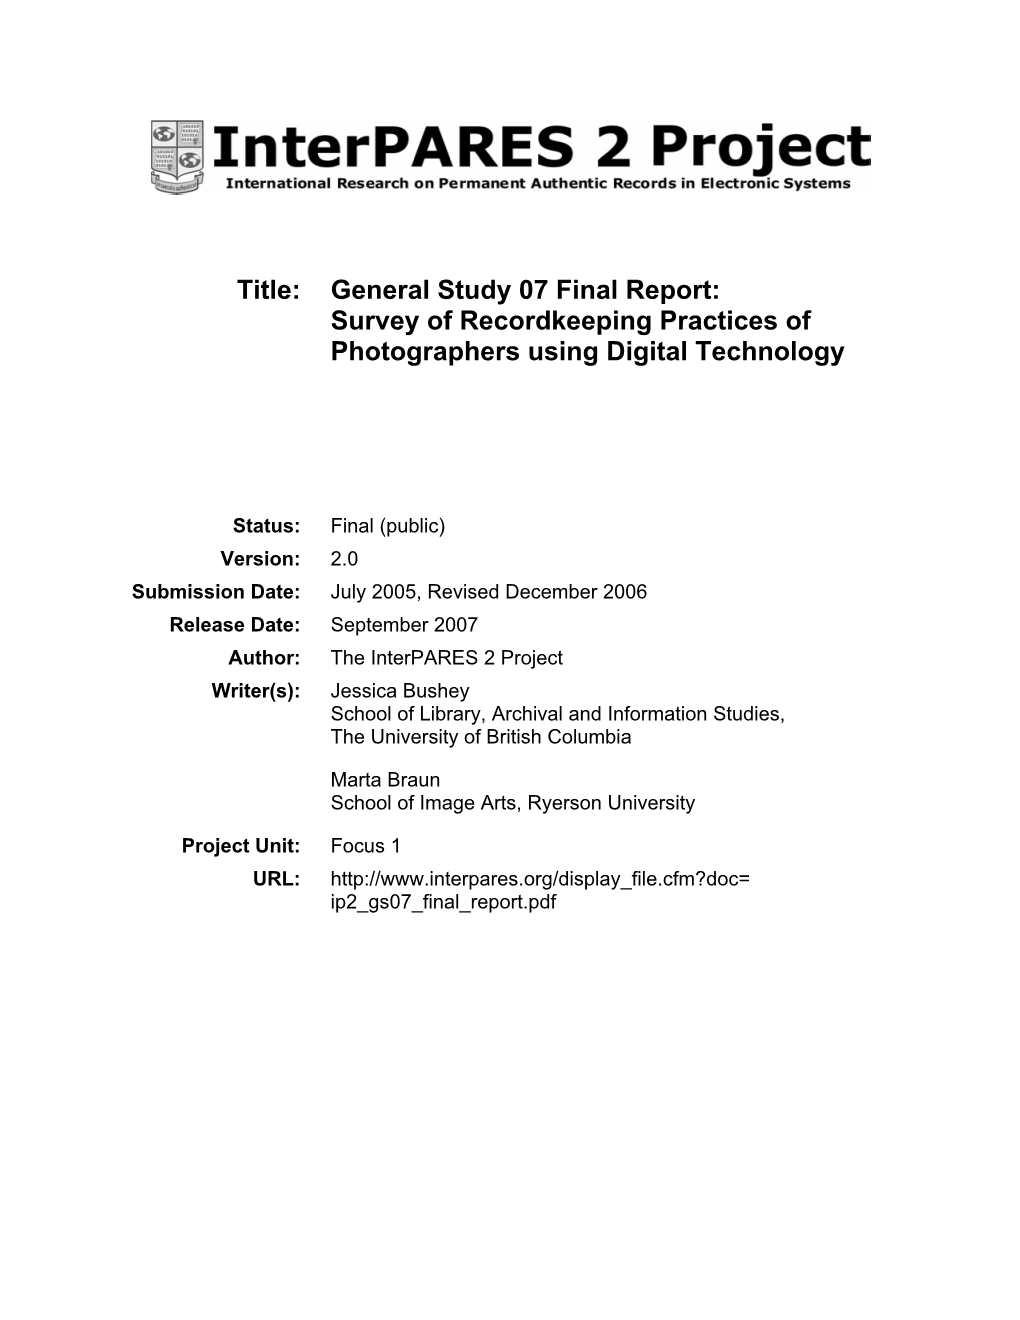 Title: General Study 07 Final Report: Survey of Recordkeeping Practices of Photographers Using Digital Technology